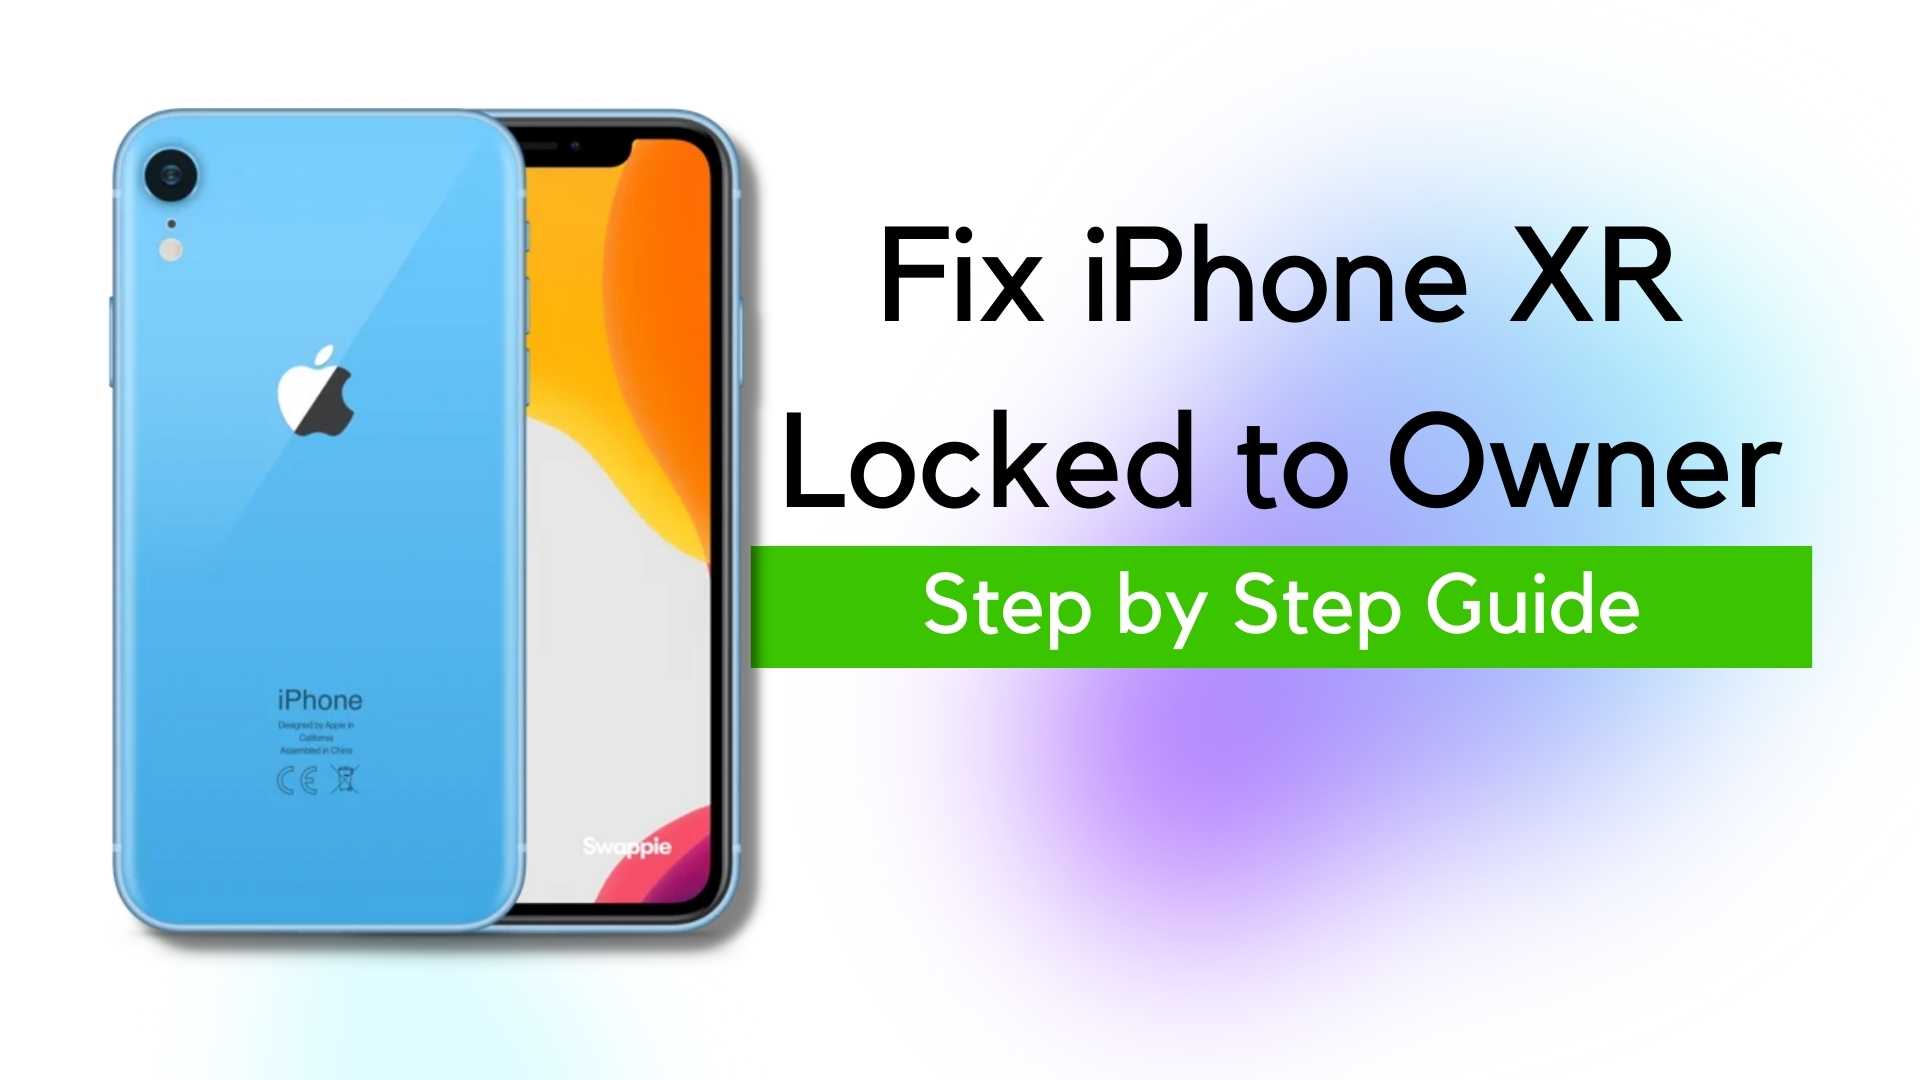 Unlock-iPhone-XR-Locked-to-Owner-iCloud-Activation-Screen